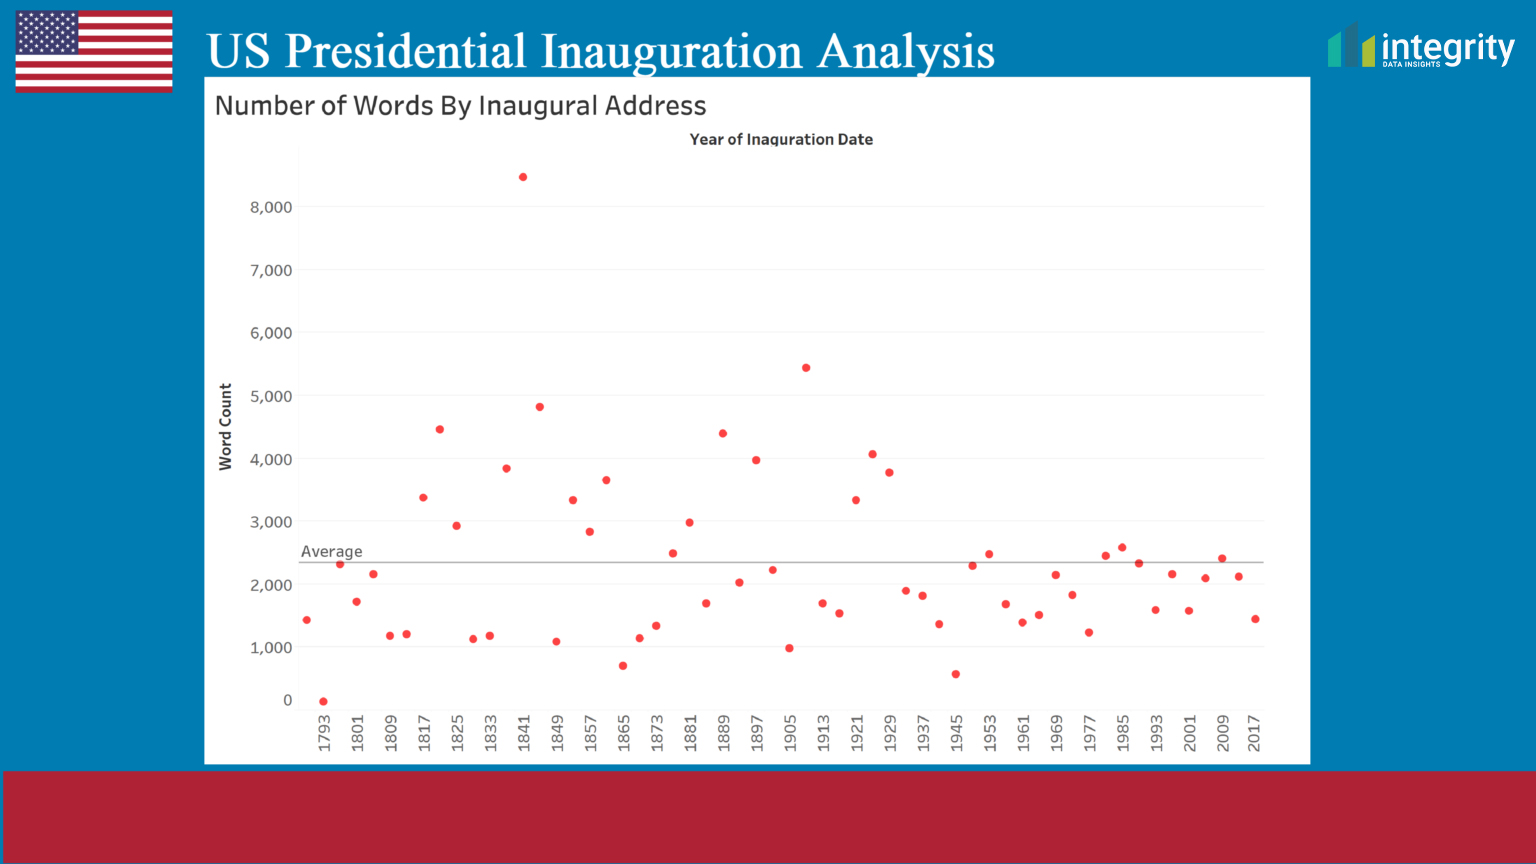 Word counts of presidential inaugural addresses